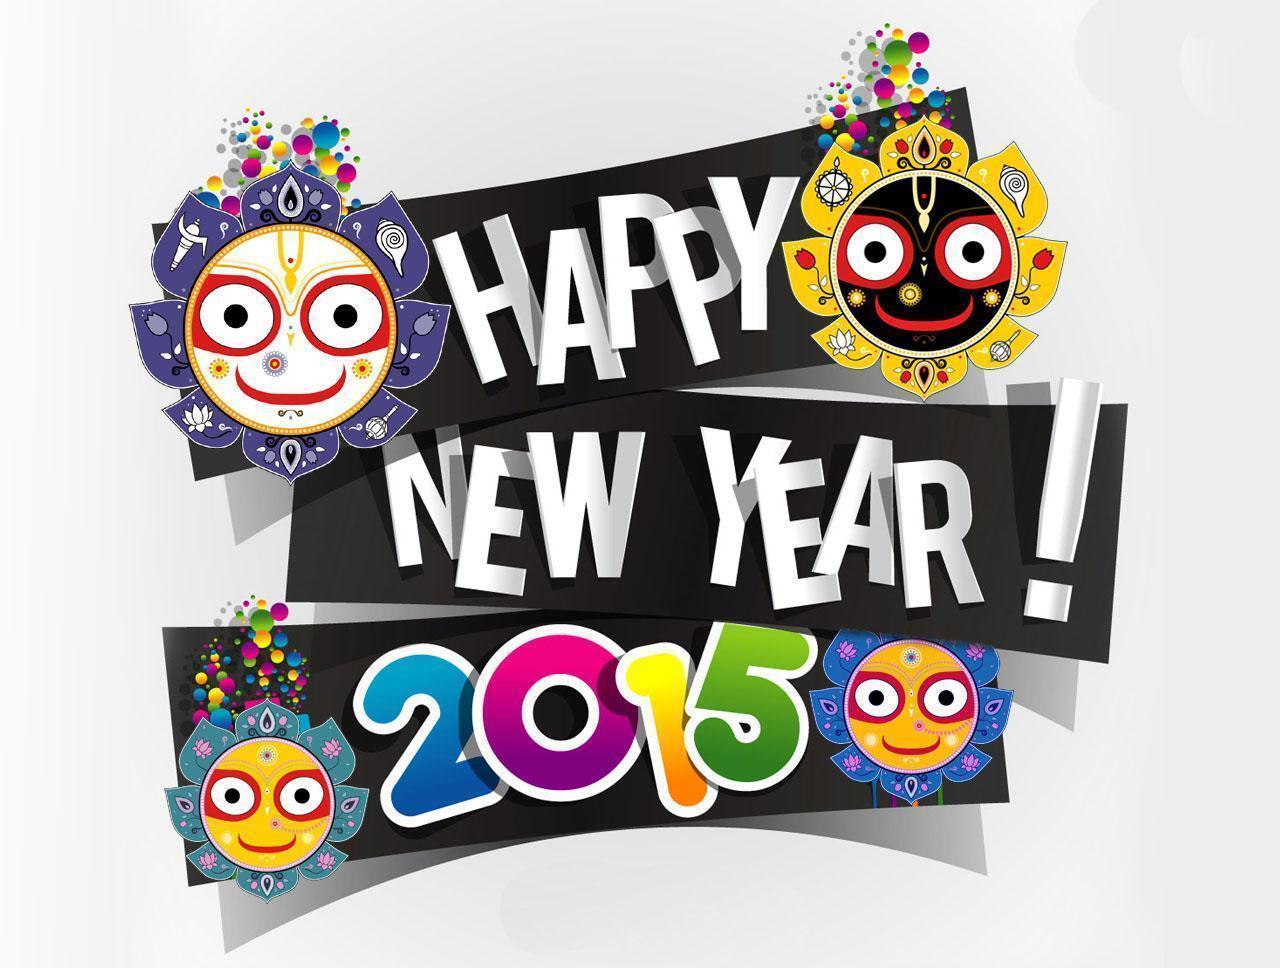 happy new year 2015 HD wallpaper free download